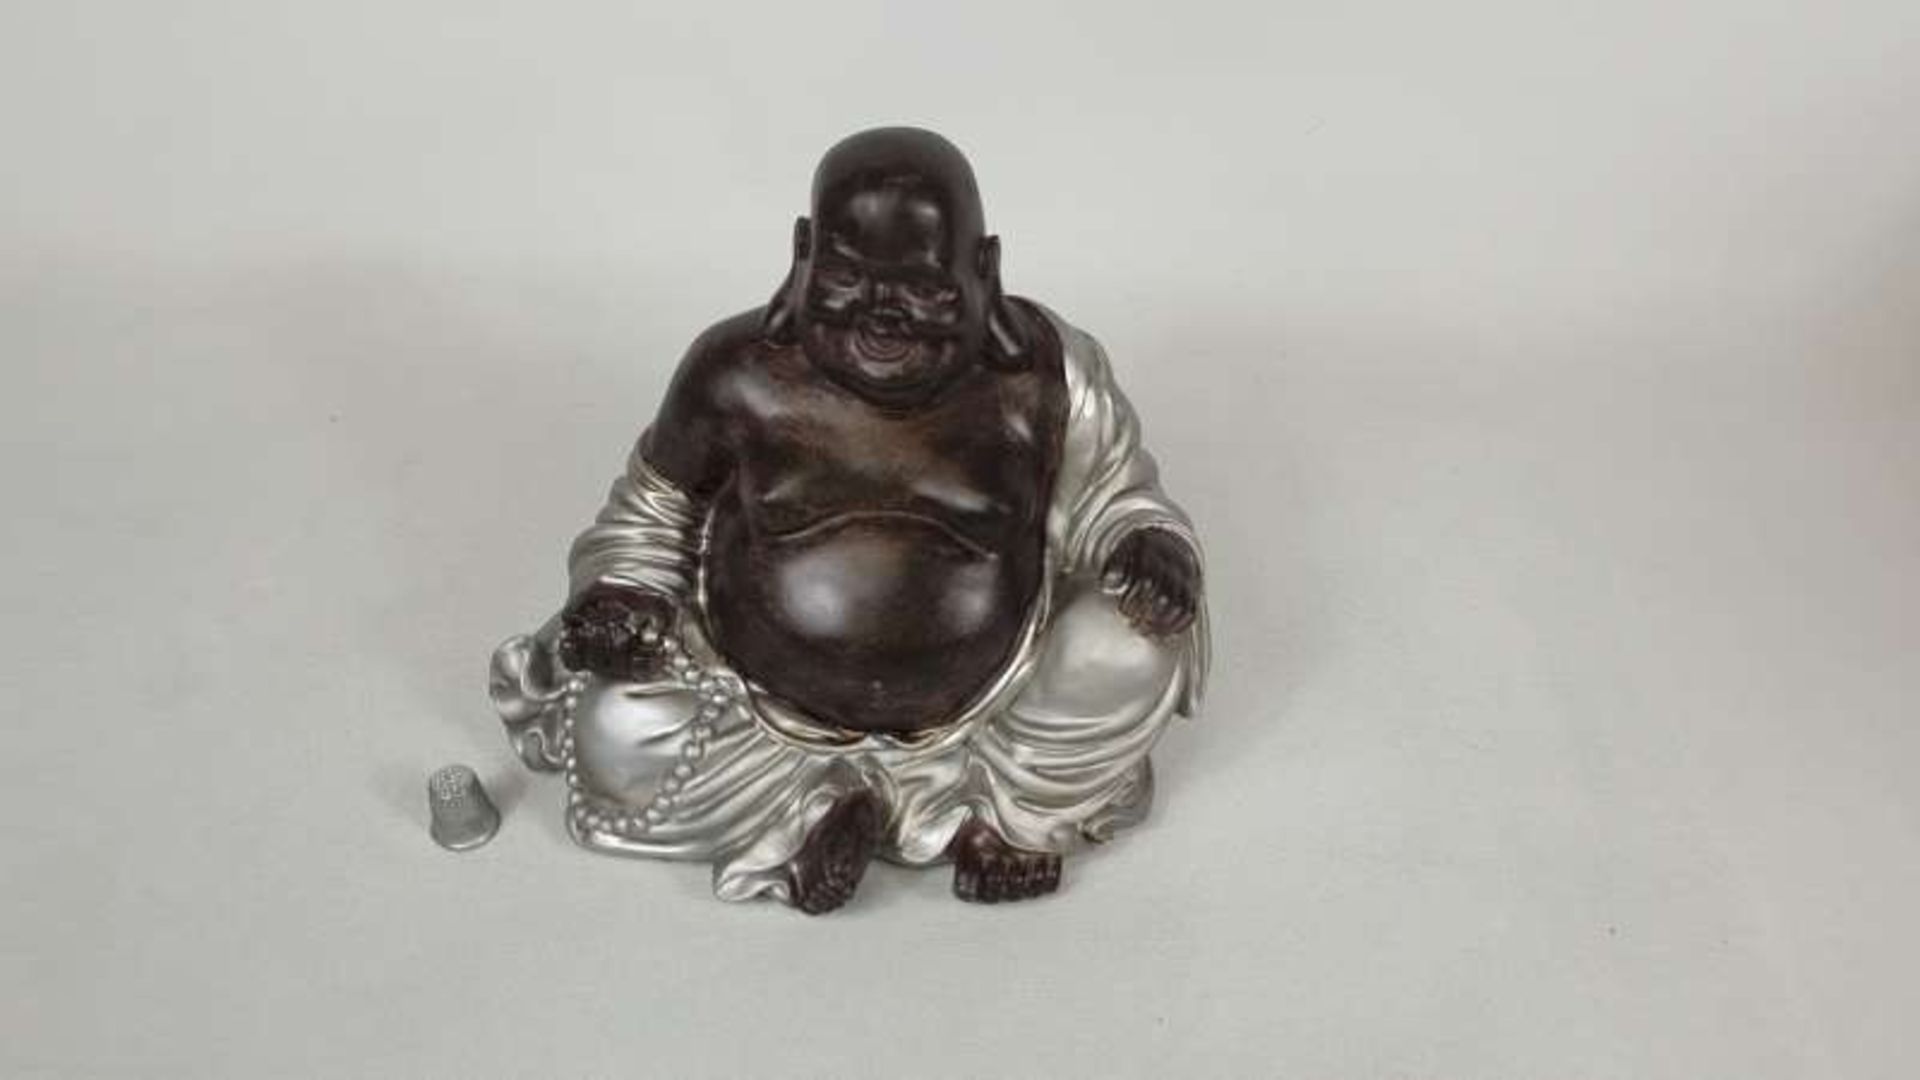 28 X LUCKY SMILING BUDDHA ORNAMENTS